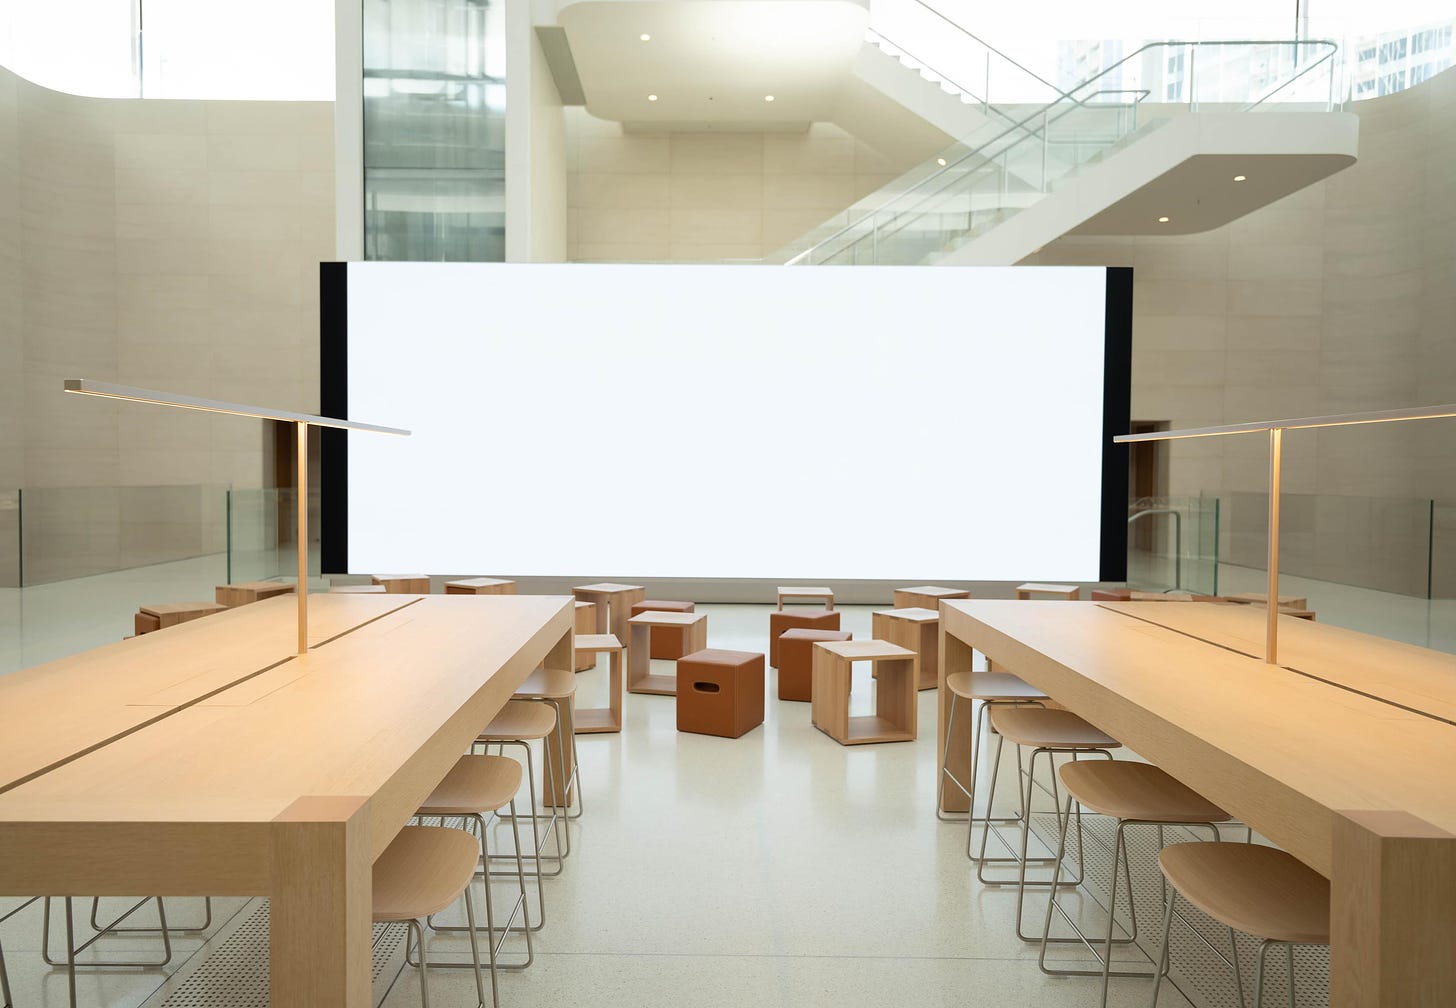 The Forum and video wall at Apple The Exchange TRX.